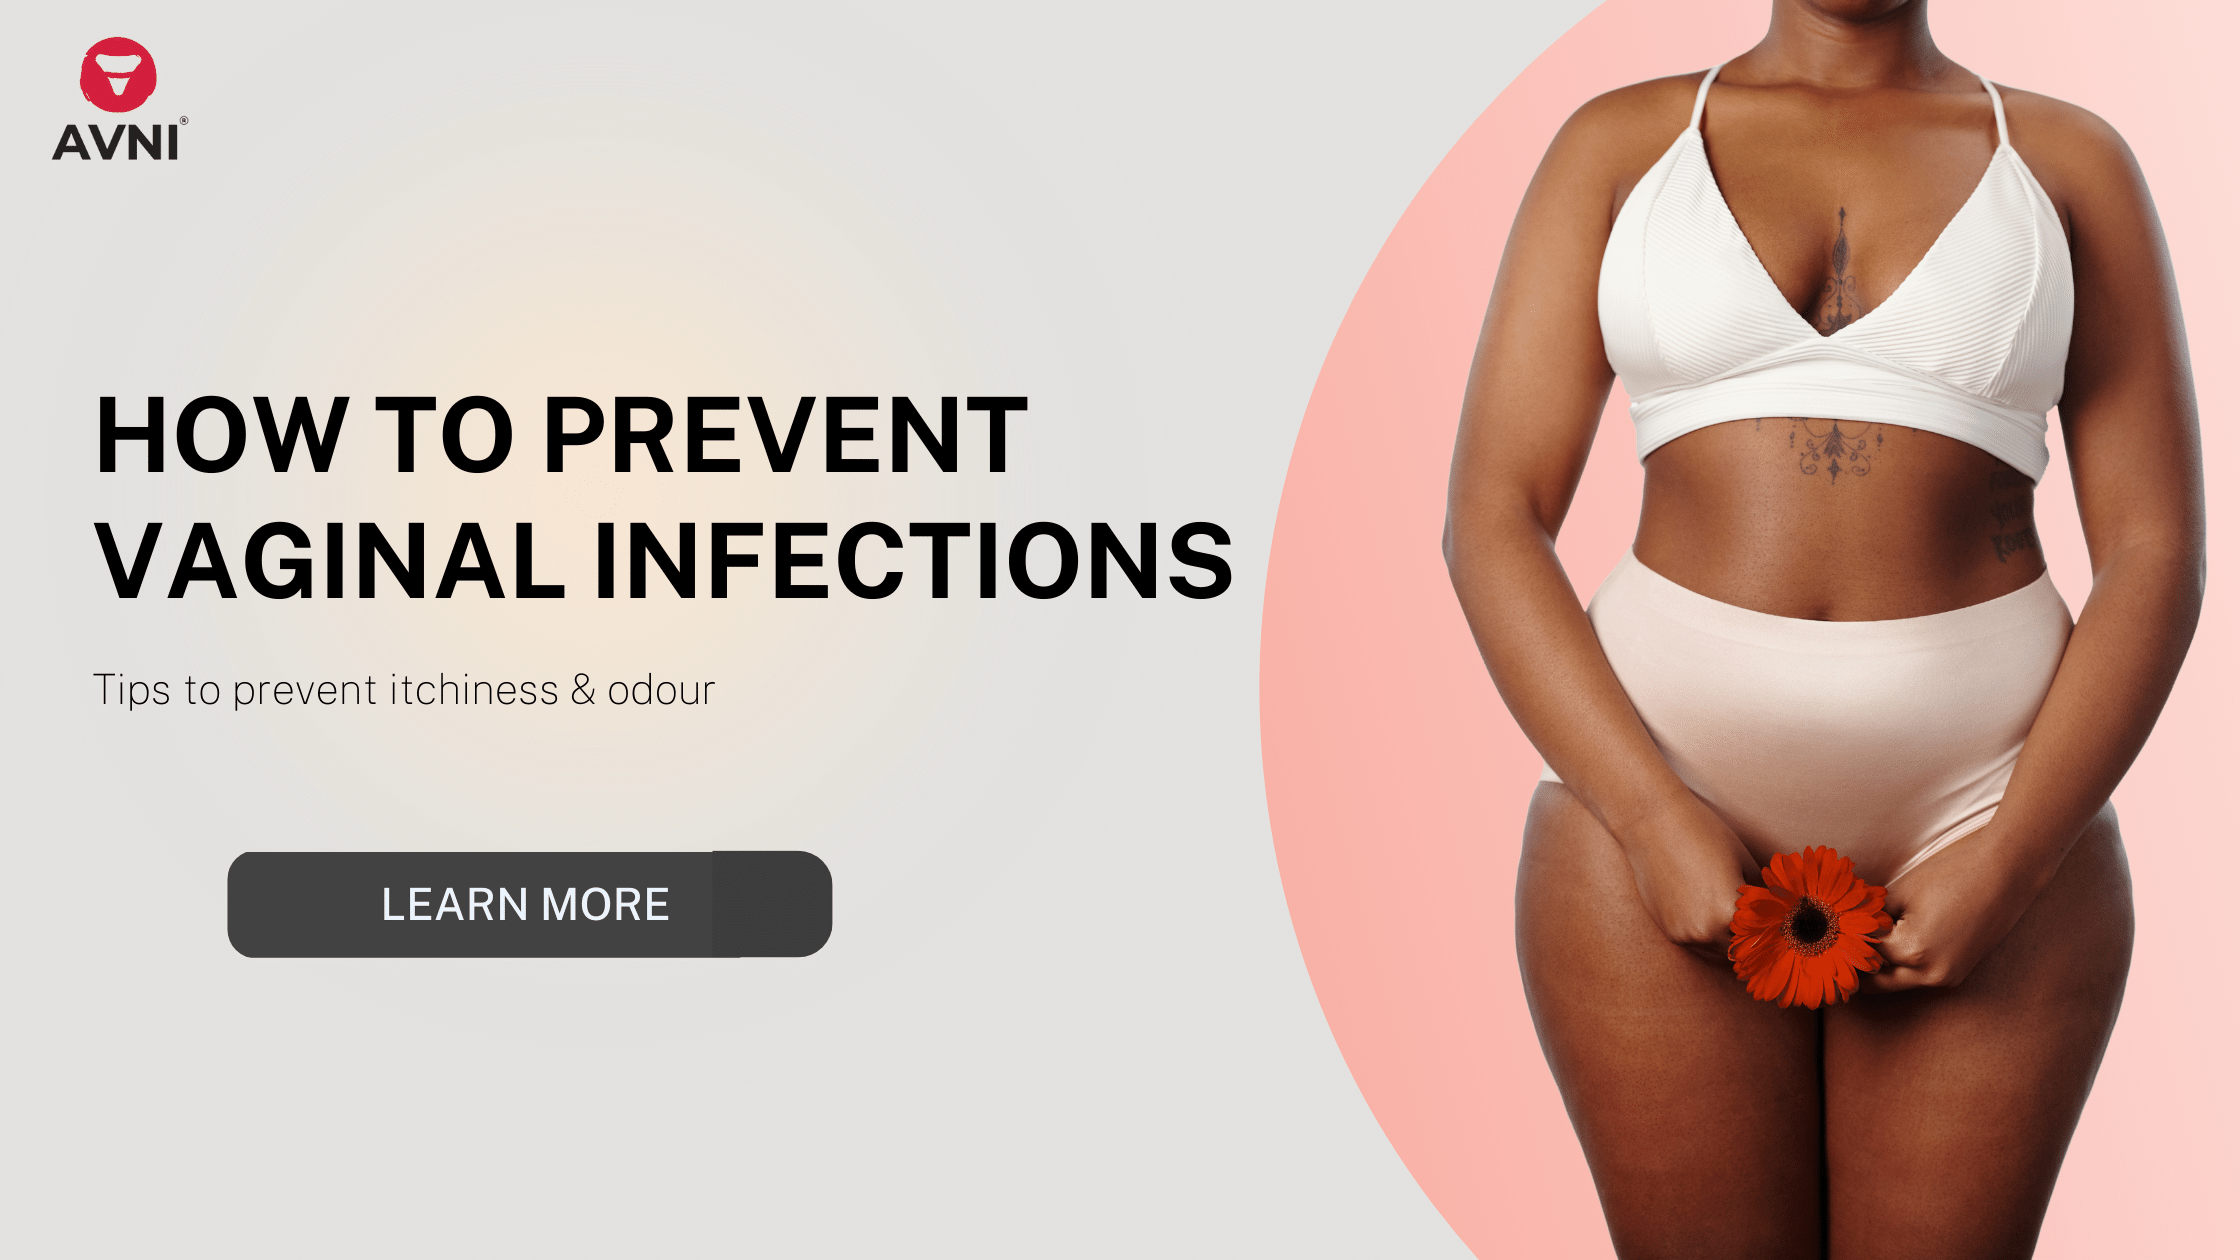 Vaginal Infection: Types & Prevention Tips